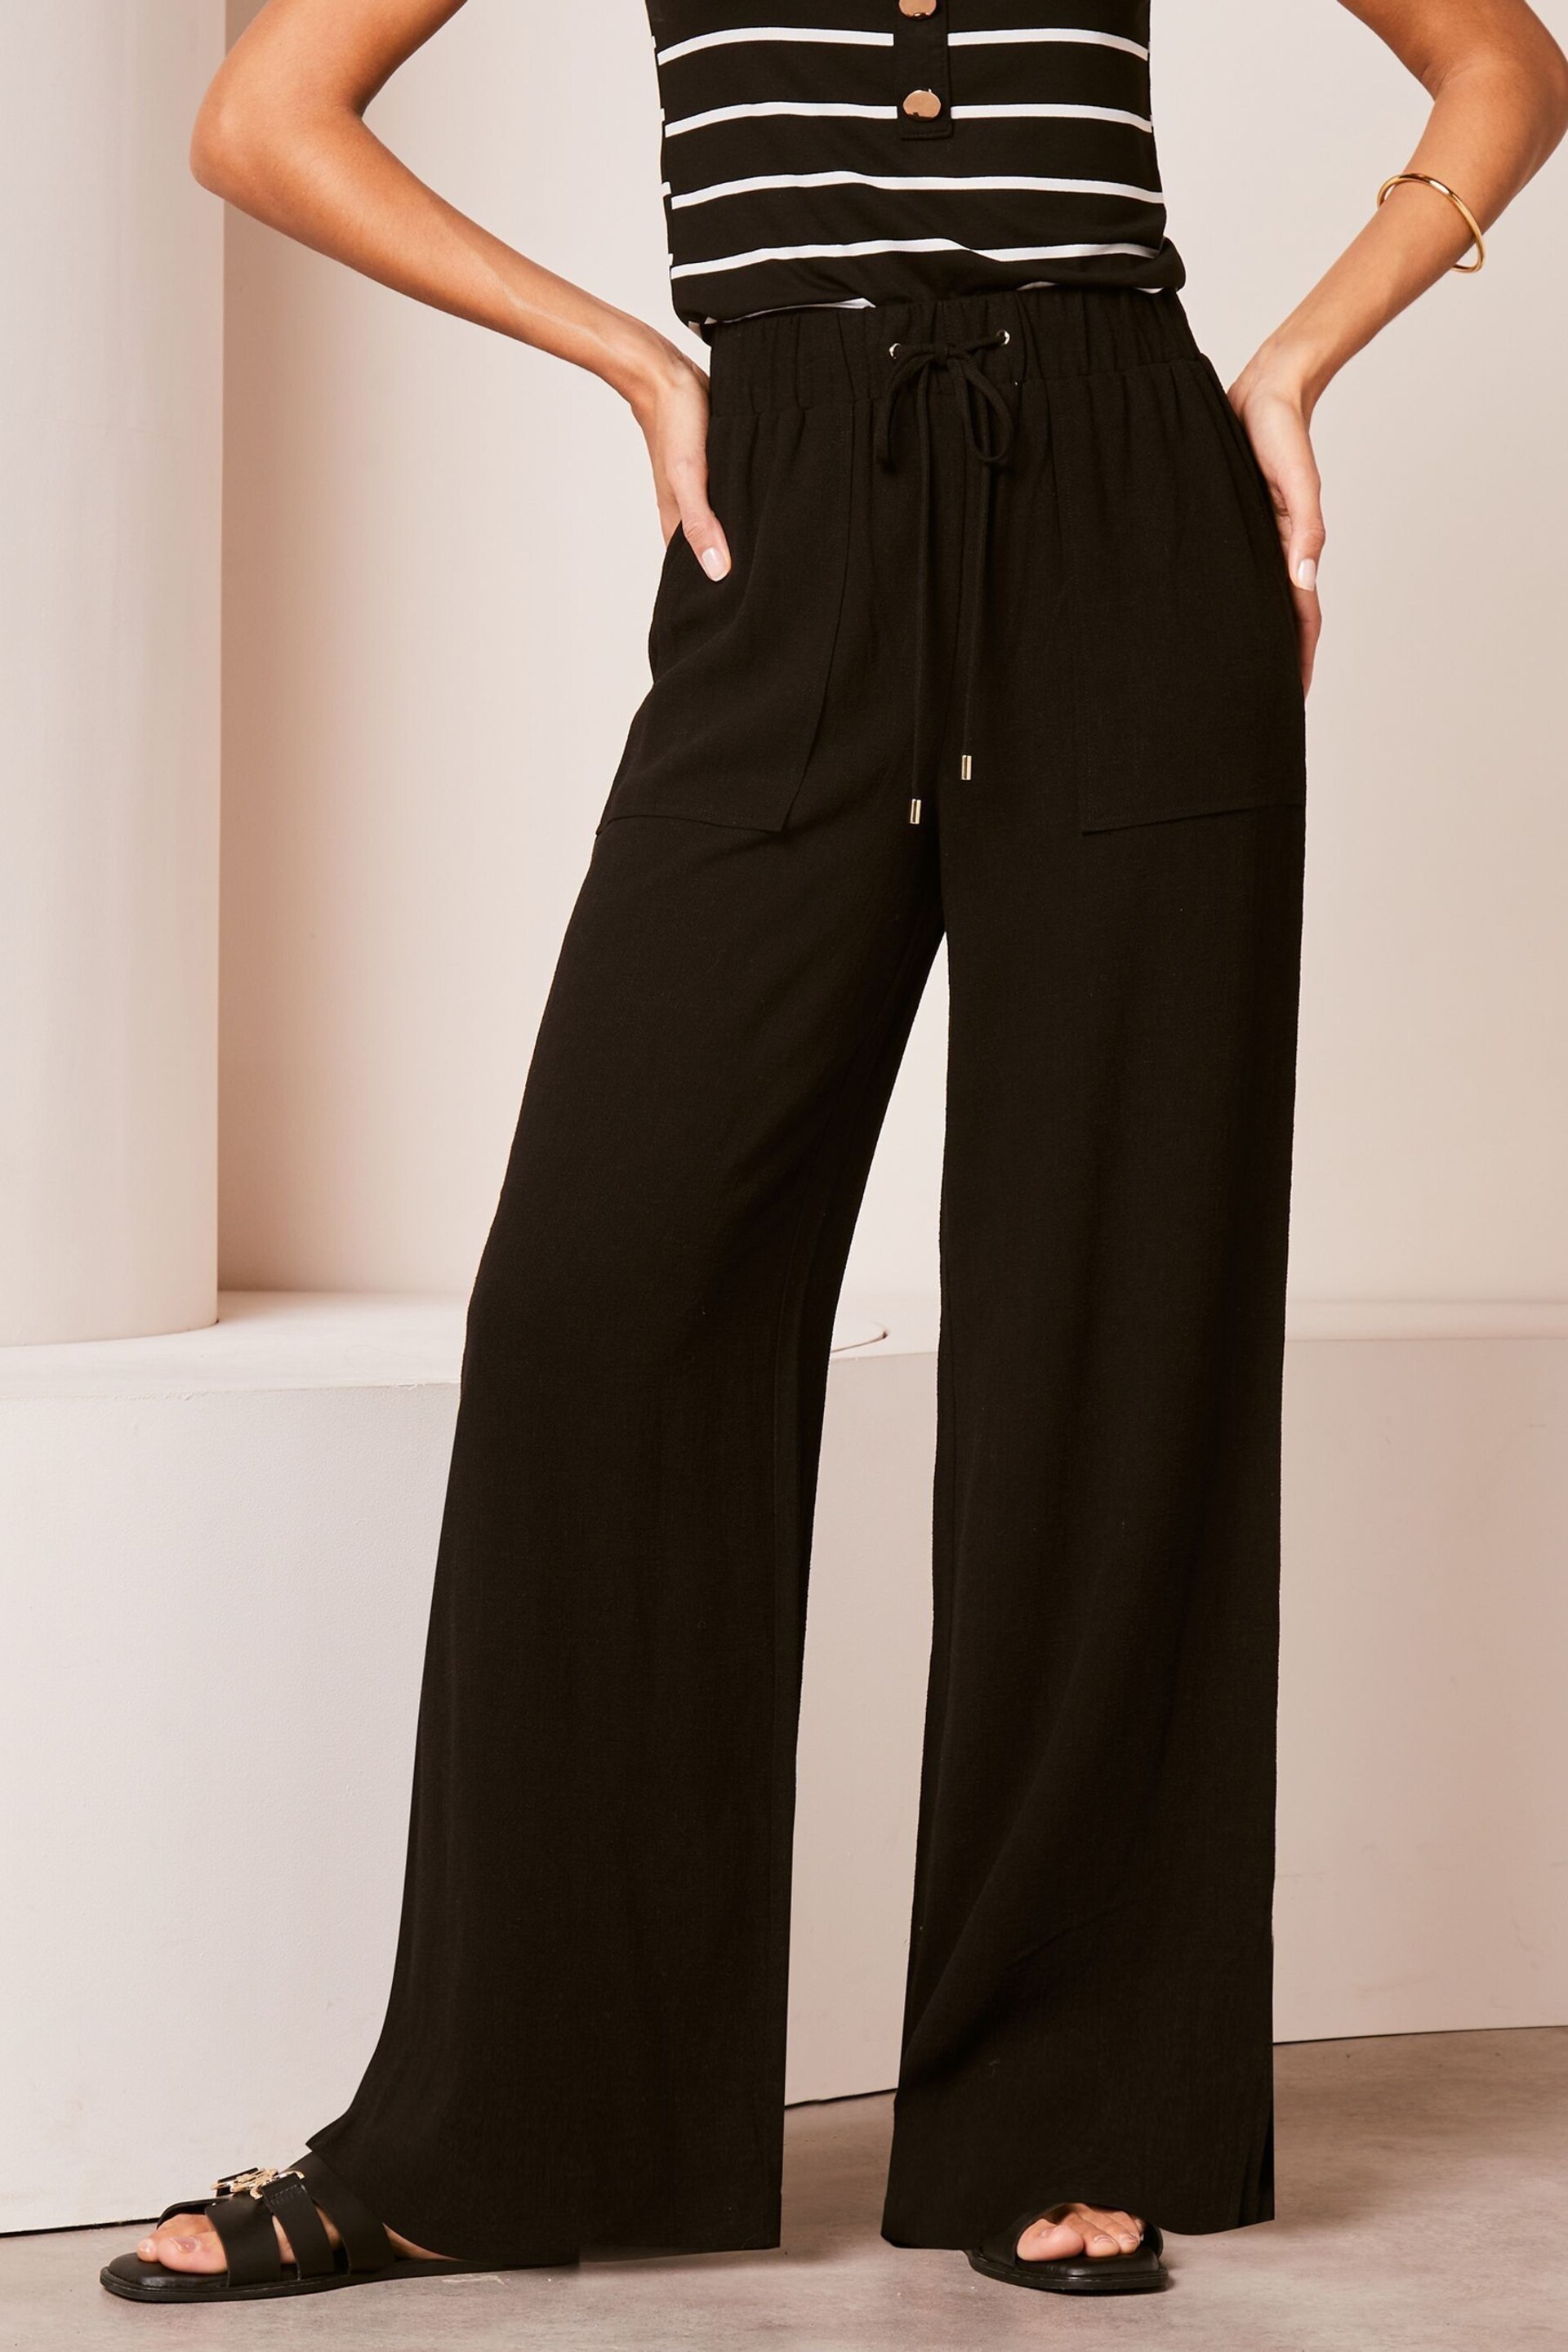 Lipsy Black Petite Wide Leg Trousers With A Touch Of Linen - Image 1 of 4